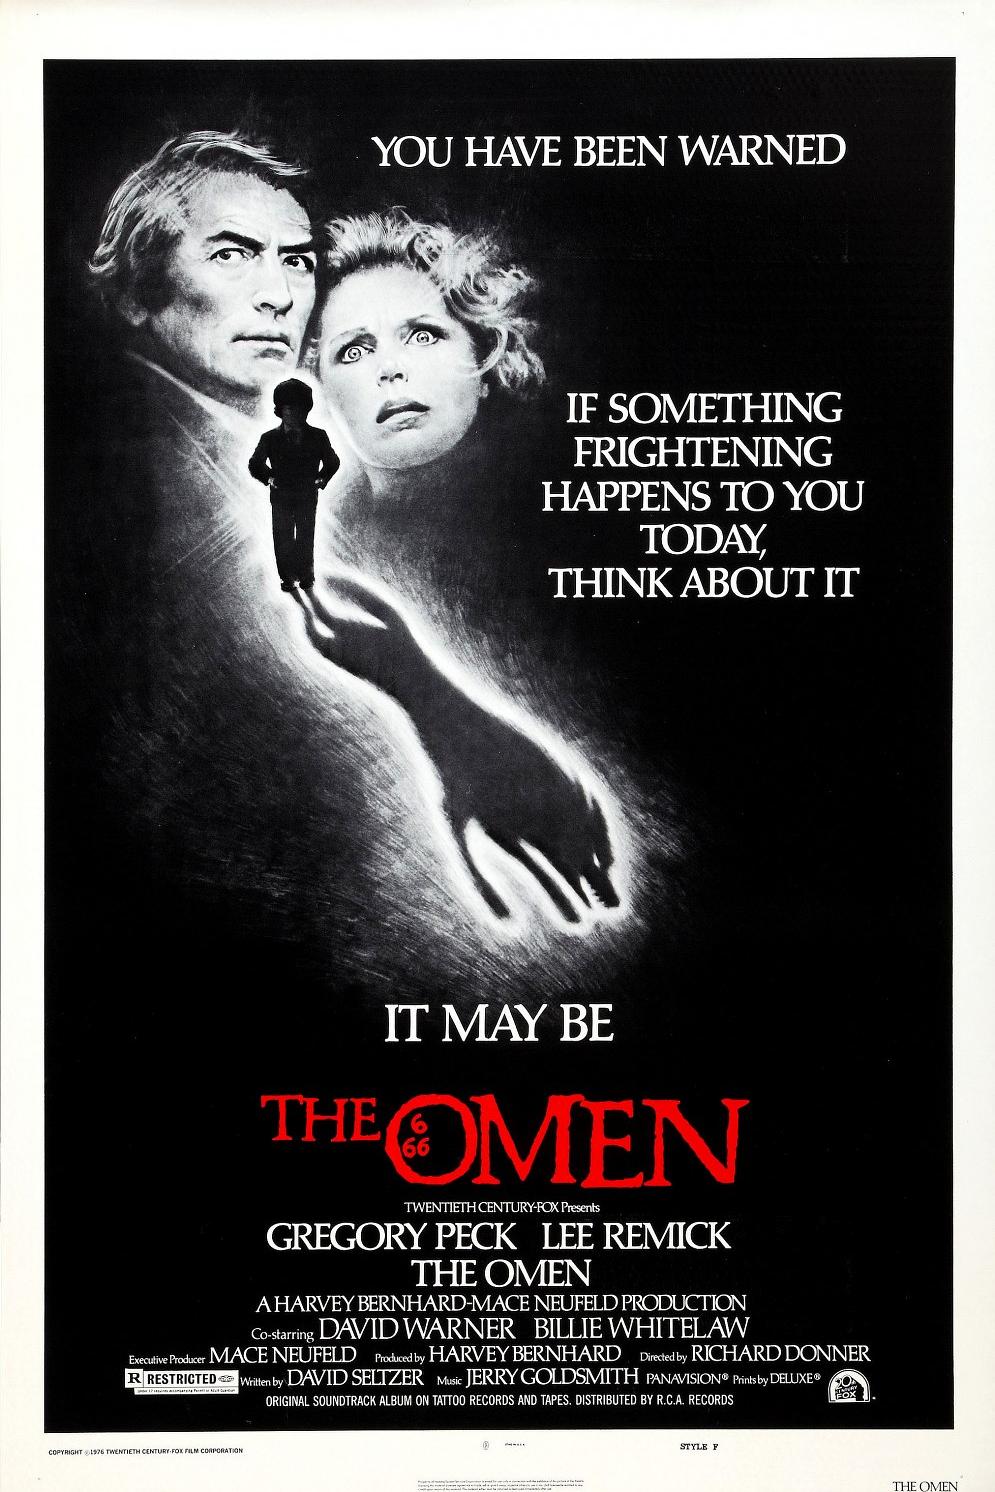 /ħ The.Omen.1976.REMASTERED.720p.BluRay.X264-AMIABLE 6.56GB-1.png